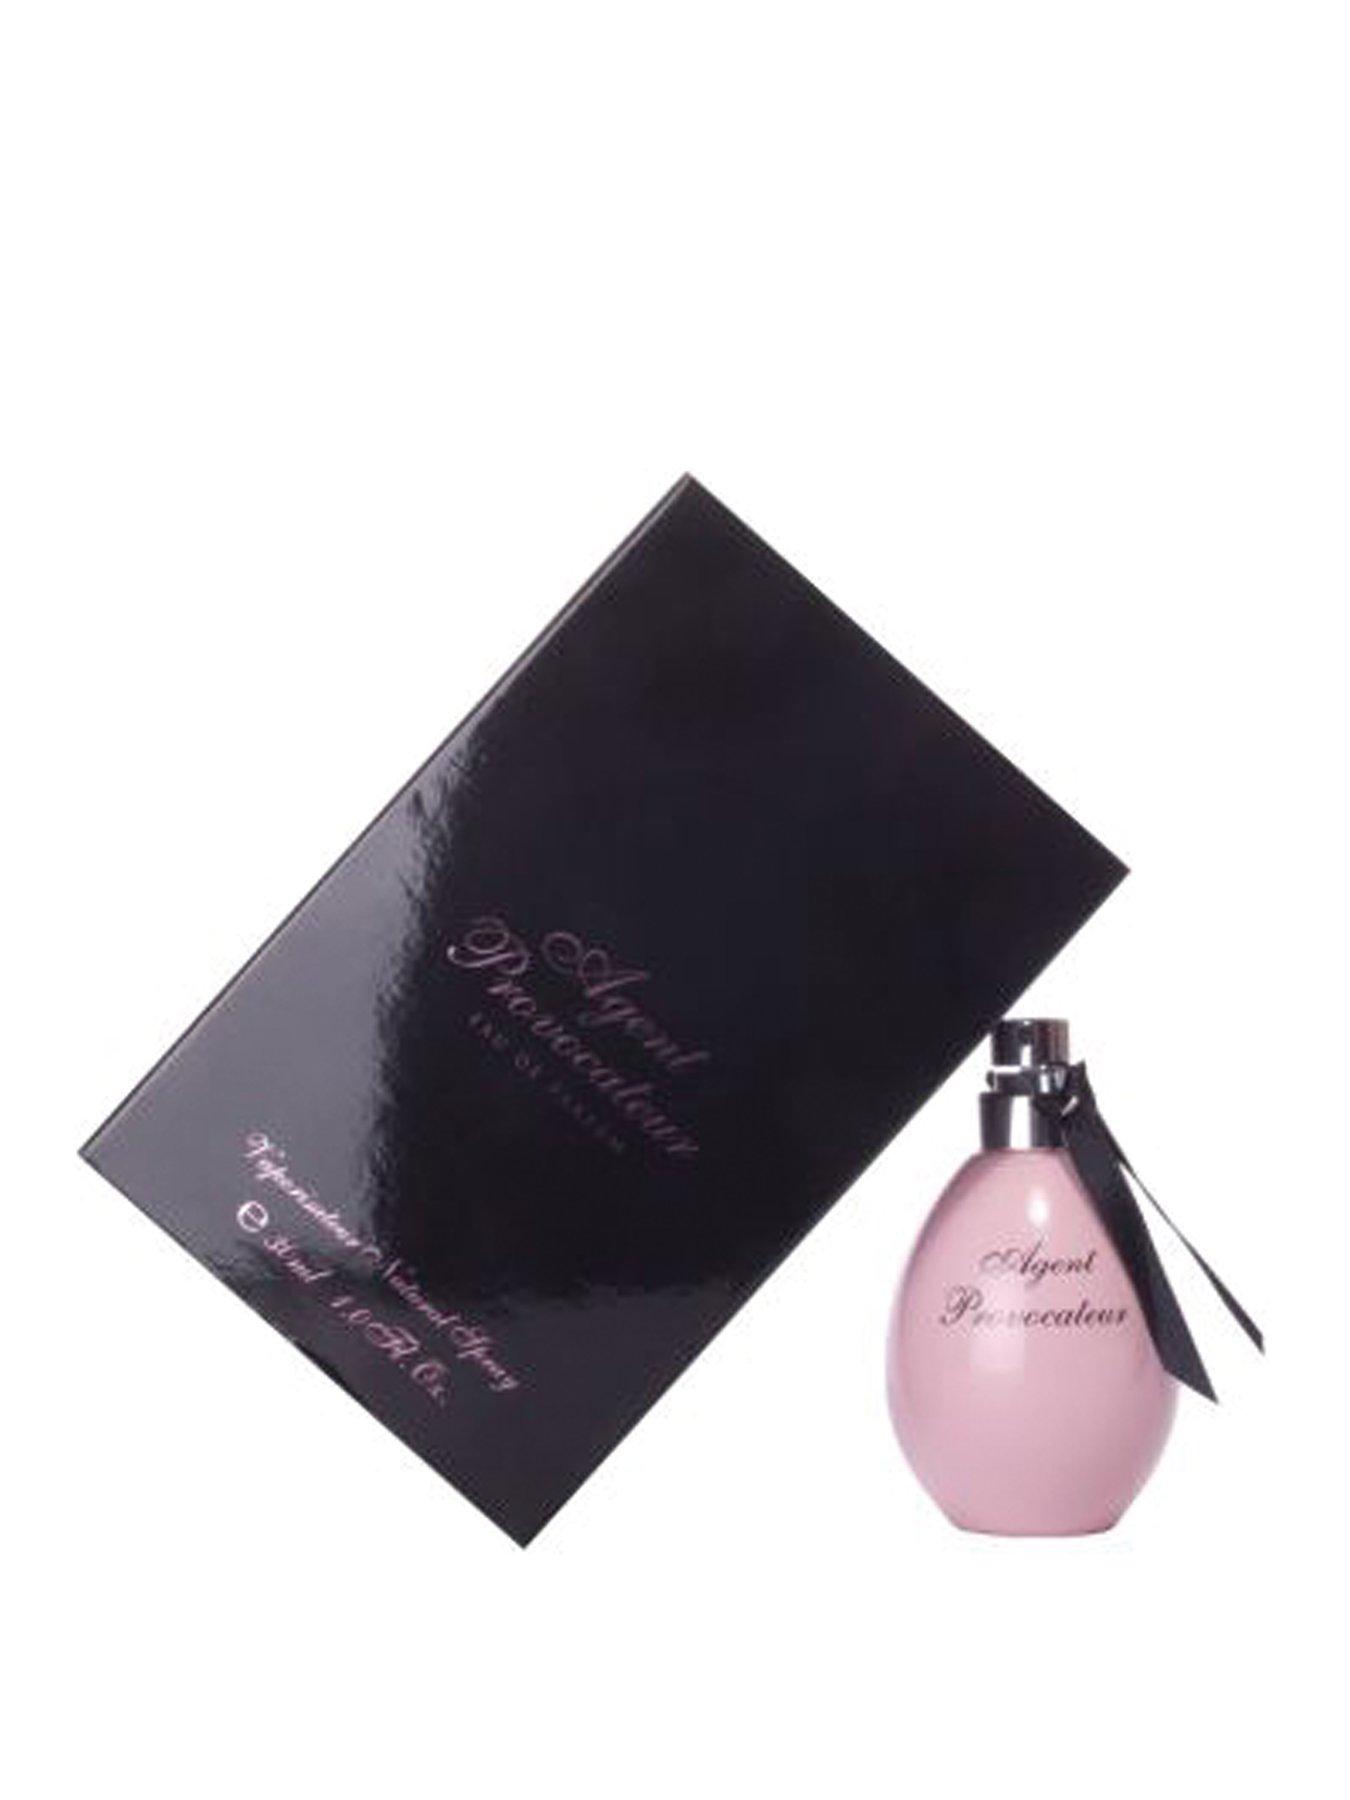 Agent provocateur | Perfume | Beauty | www.very.co.uk